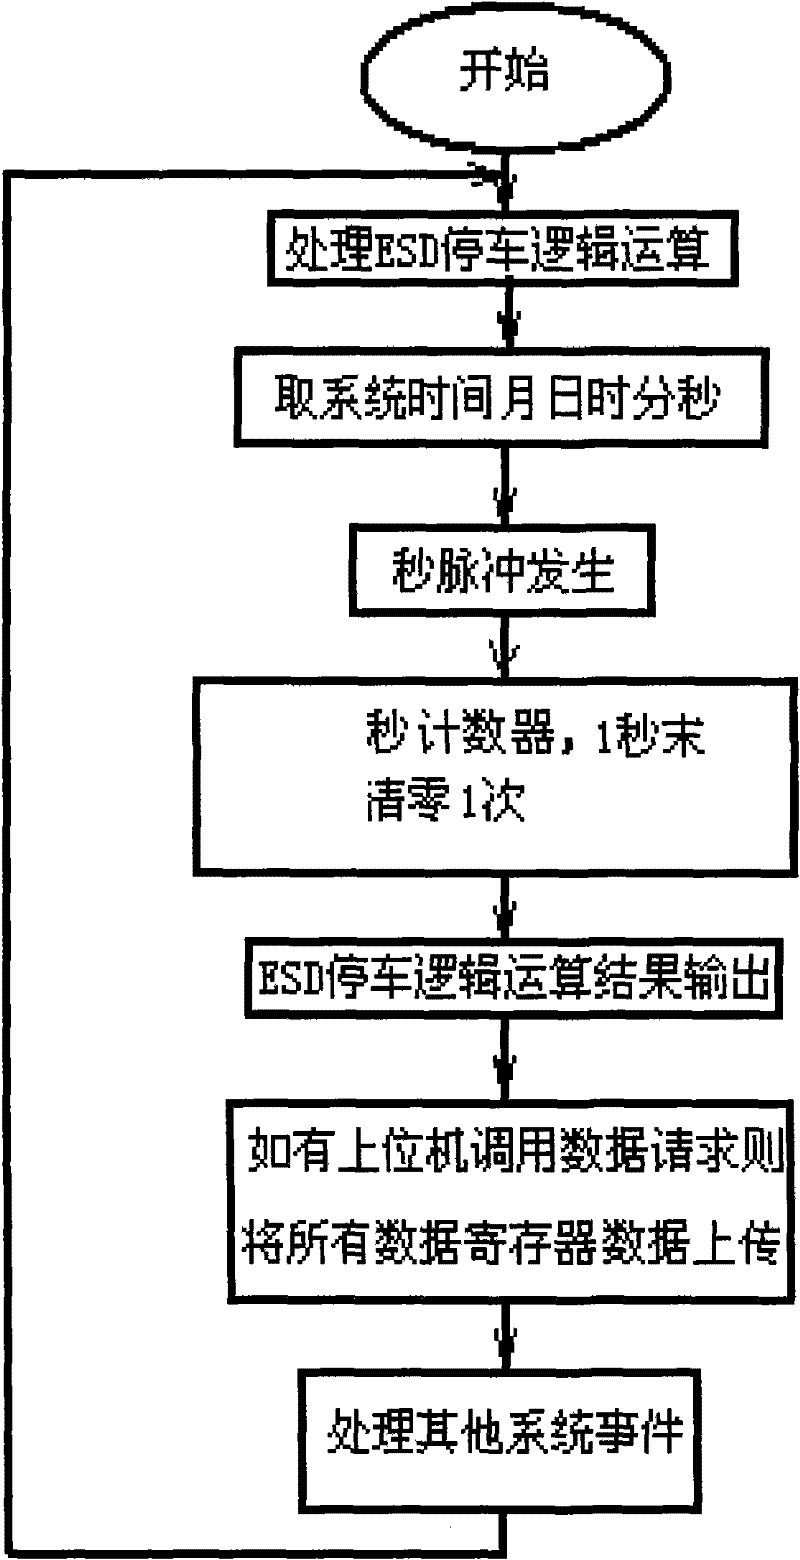 Emergency stop event sequence recording system and setting method thereof